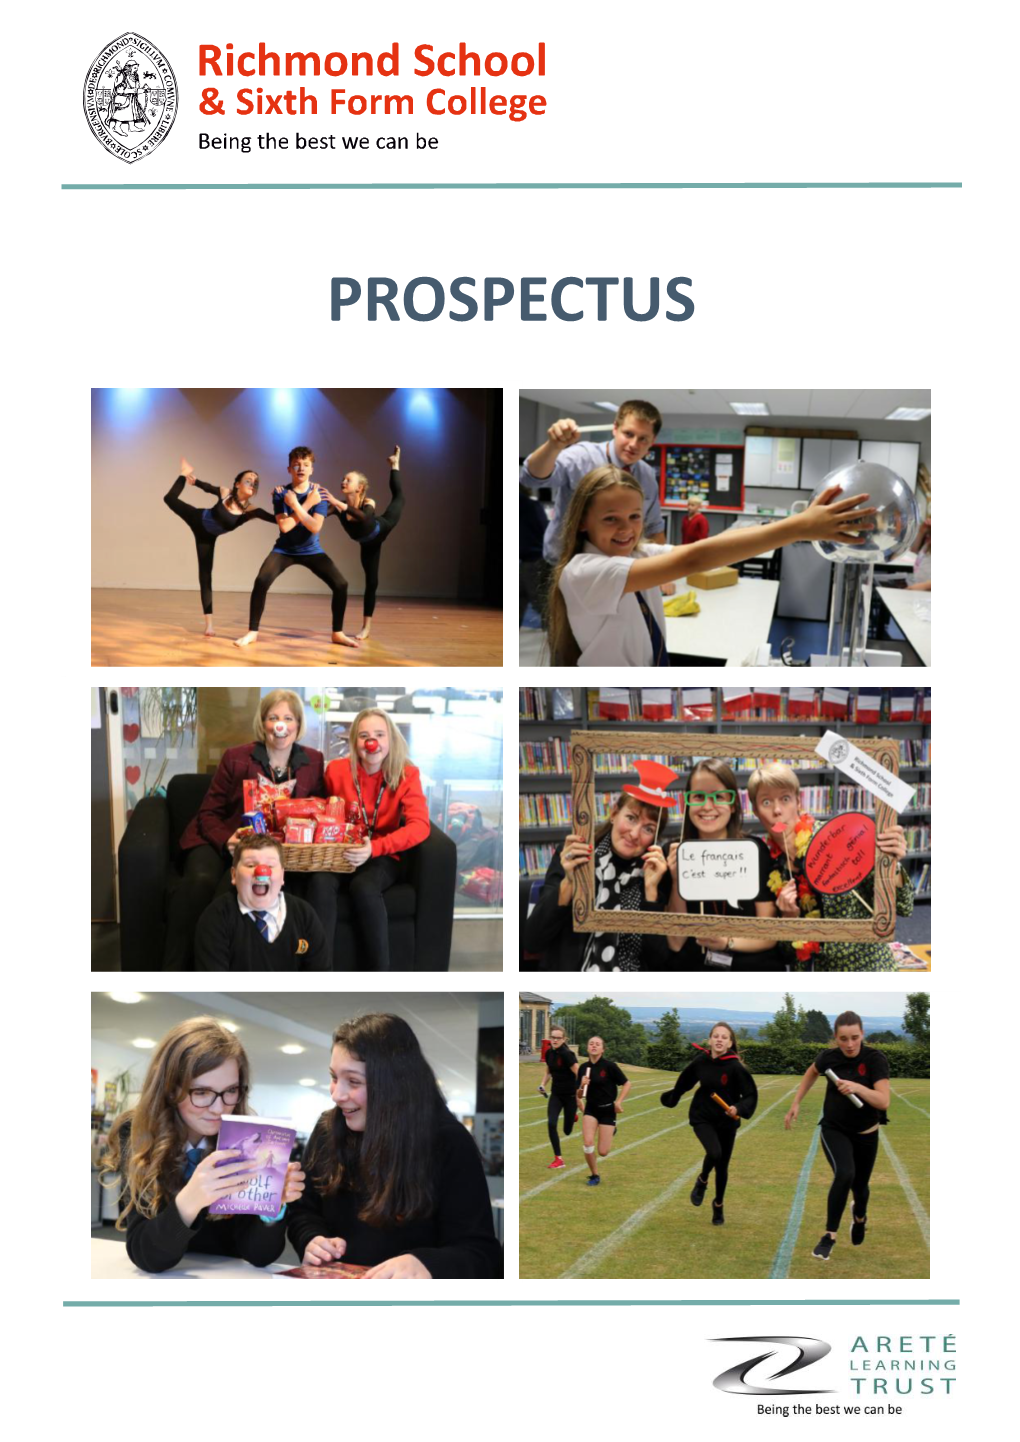 Our Prospectus Has Given You a Flavour of Life at Richmond School and Sixth Form College